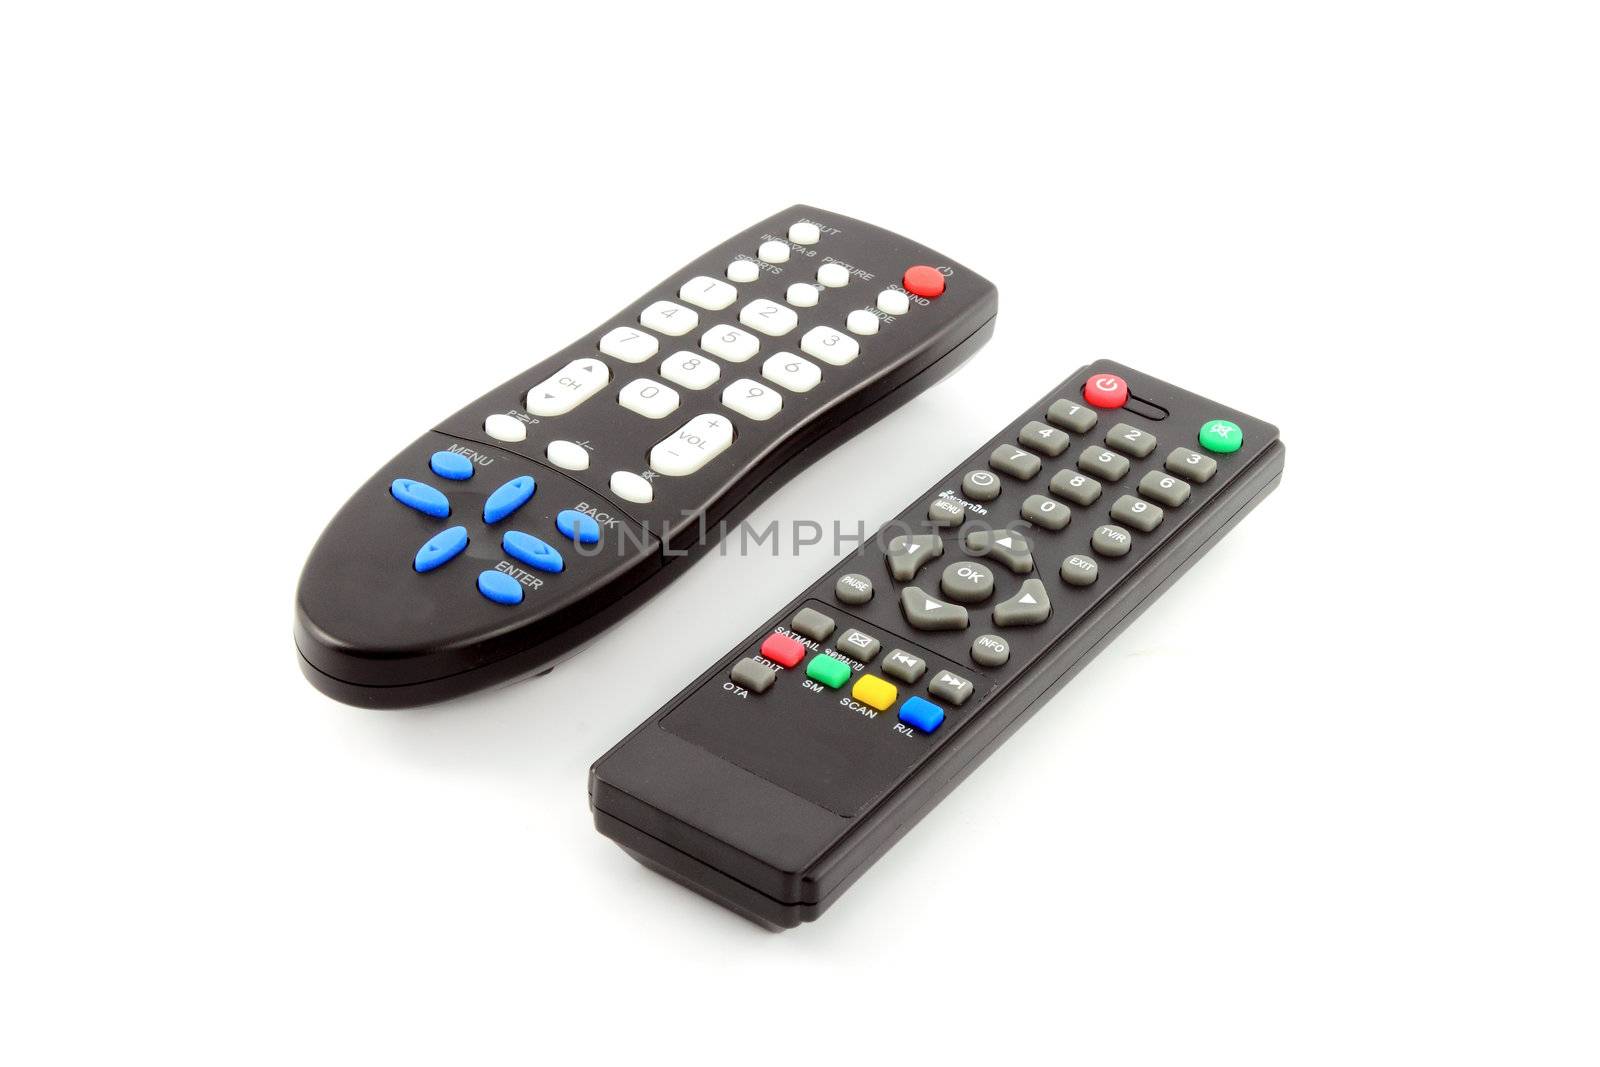 TV remote control on a white background by geargodz